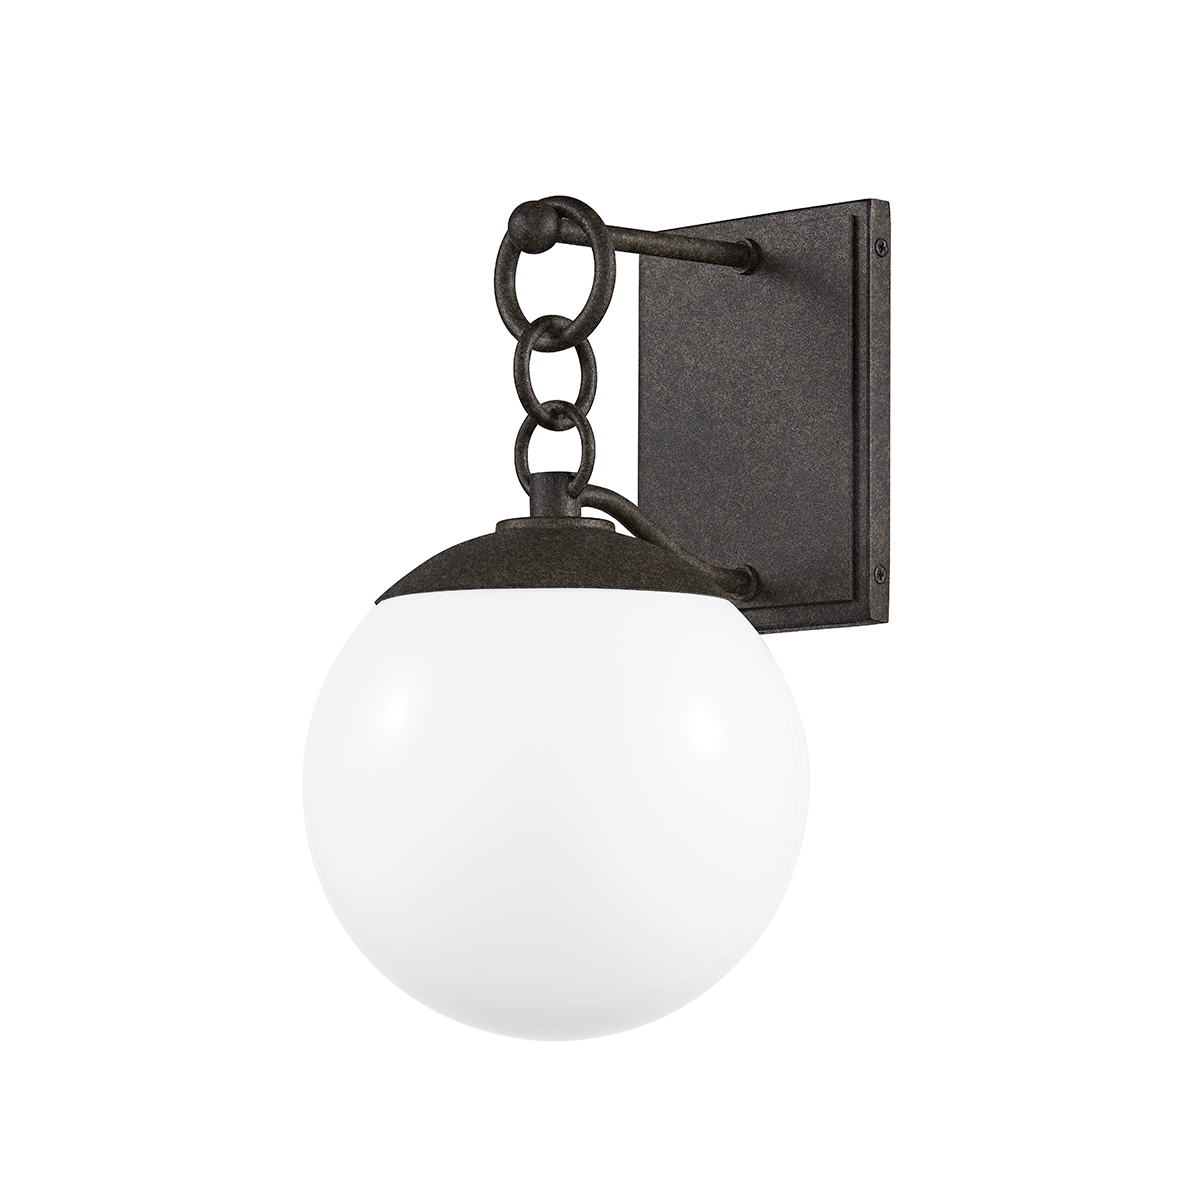 Troy Lighting 1 LIGHT SMALL EXTERIOR WALL SCONCE B1508 Outdoor l Wall Troy Lighting FRENCH IRON  